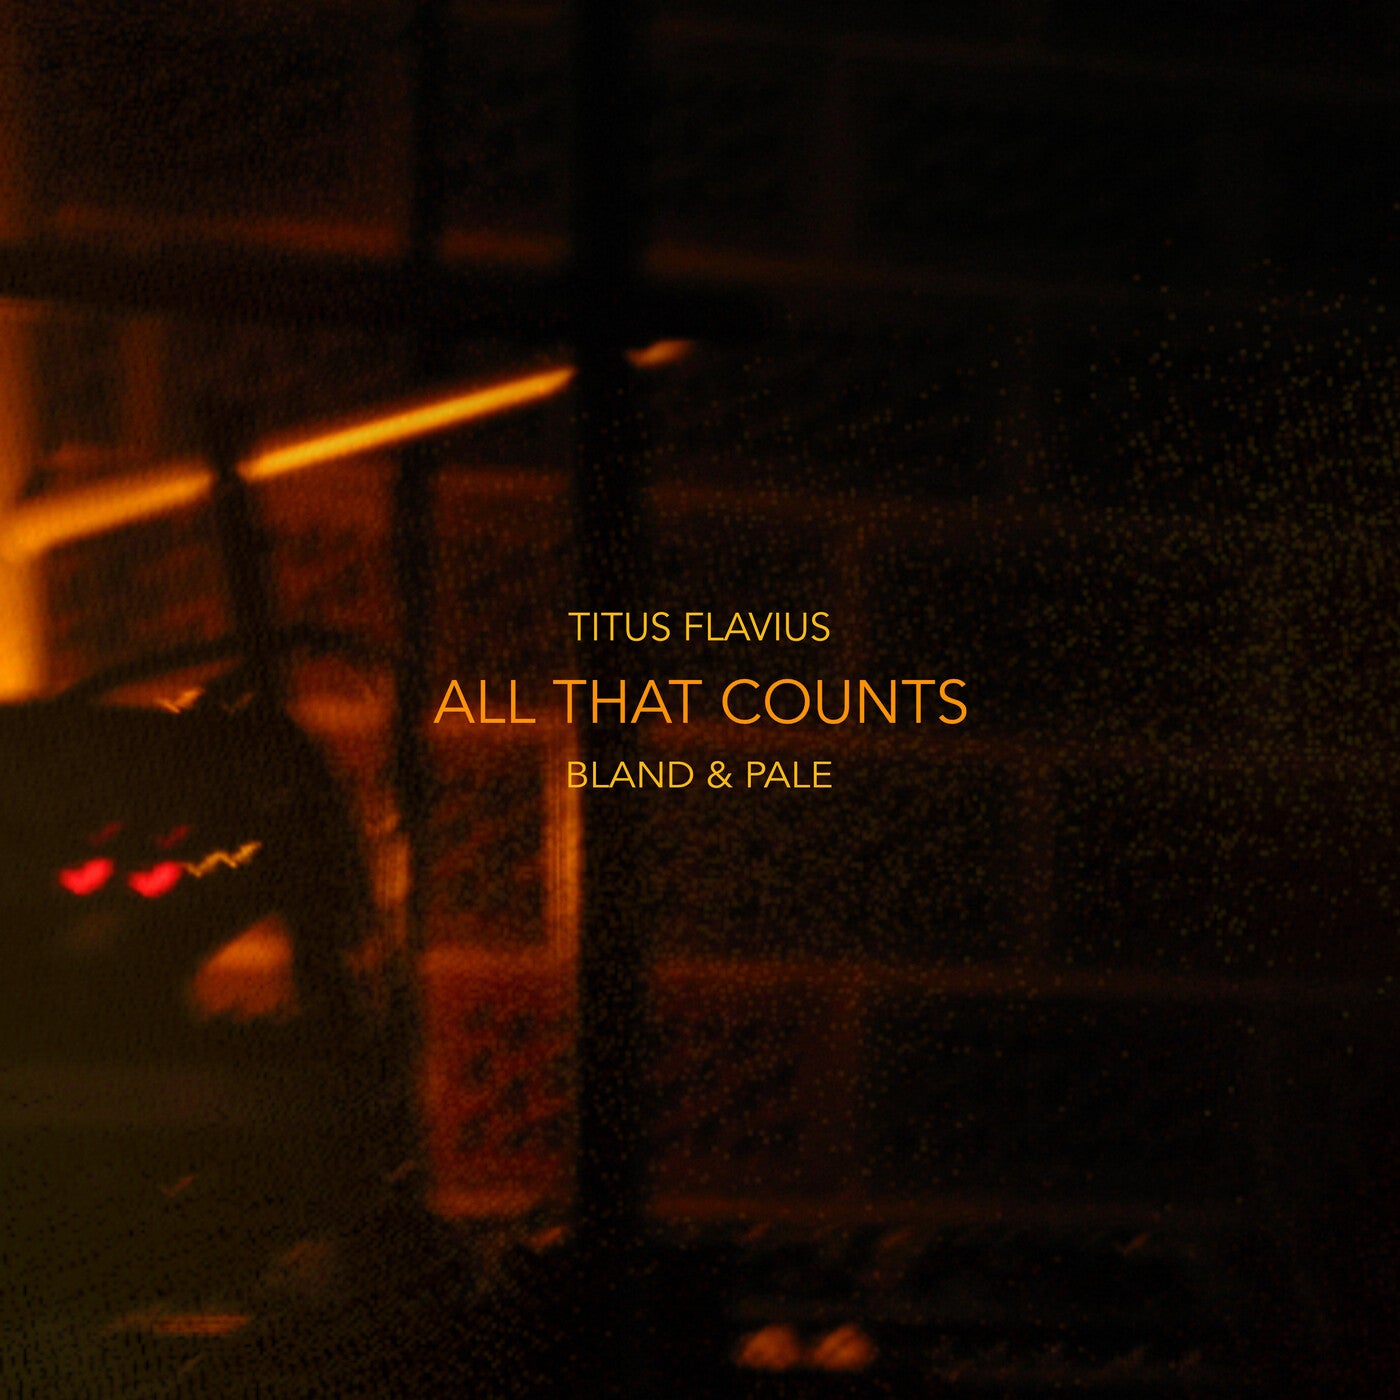 All That Counts